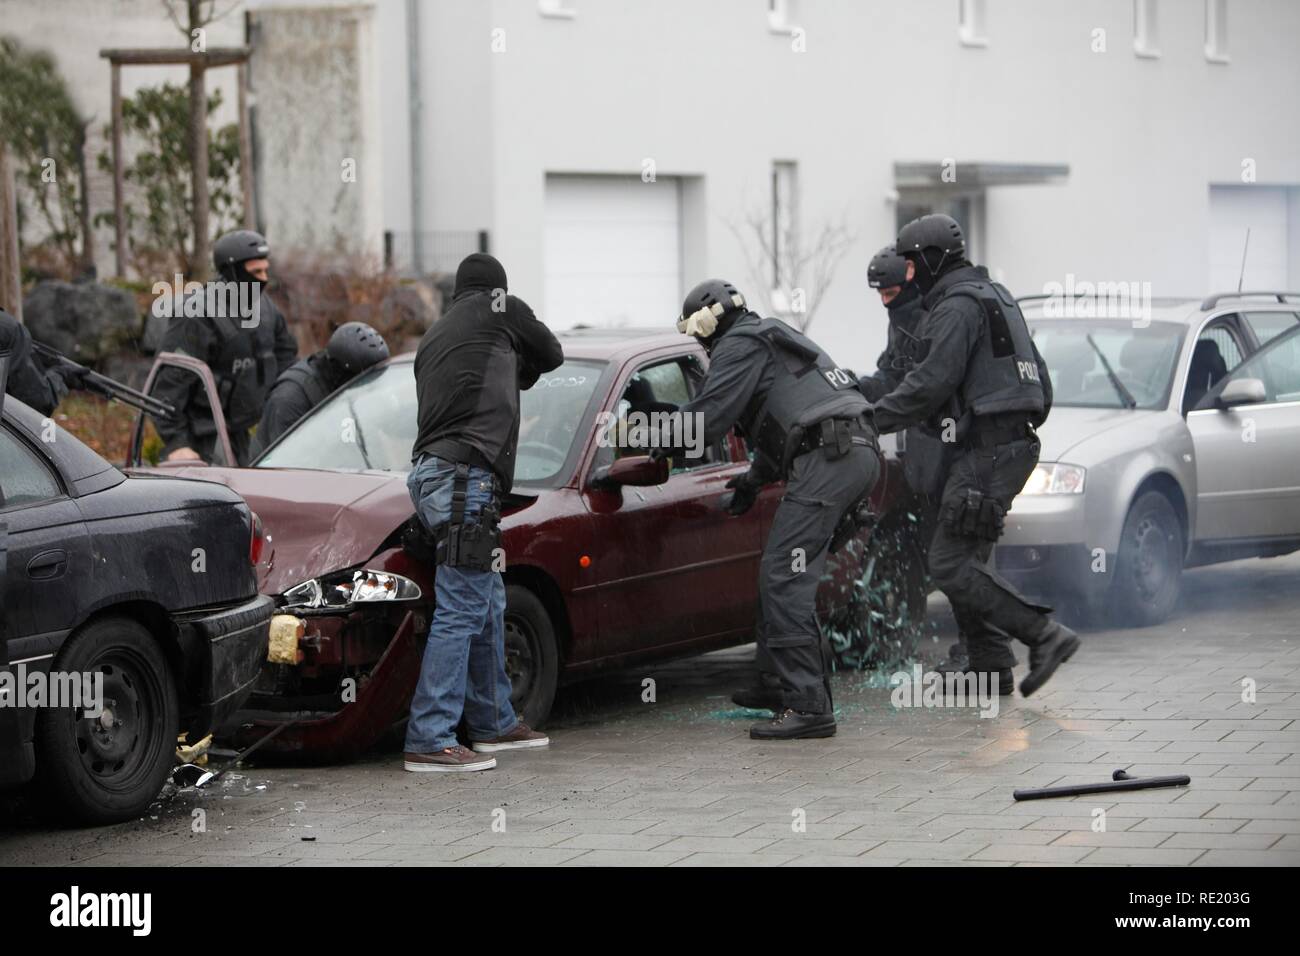 Police special task forces, SEC, during a practical rehearsal, capturing 2 perpetrators in a car, Duesseldorf Stock Photo